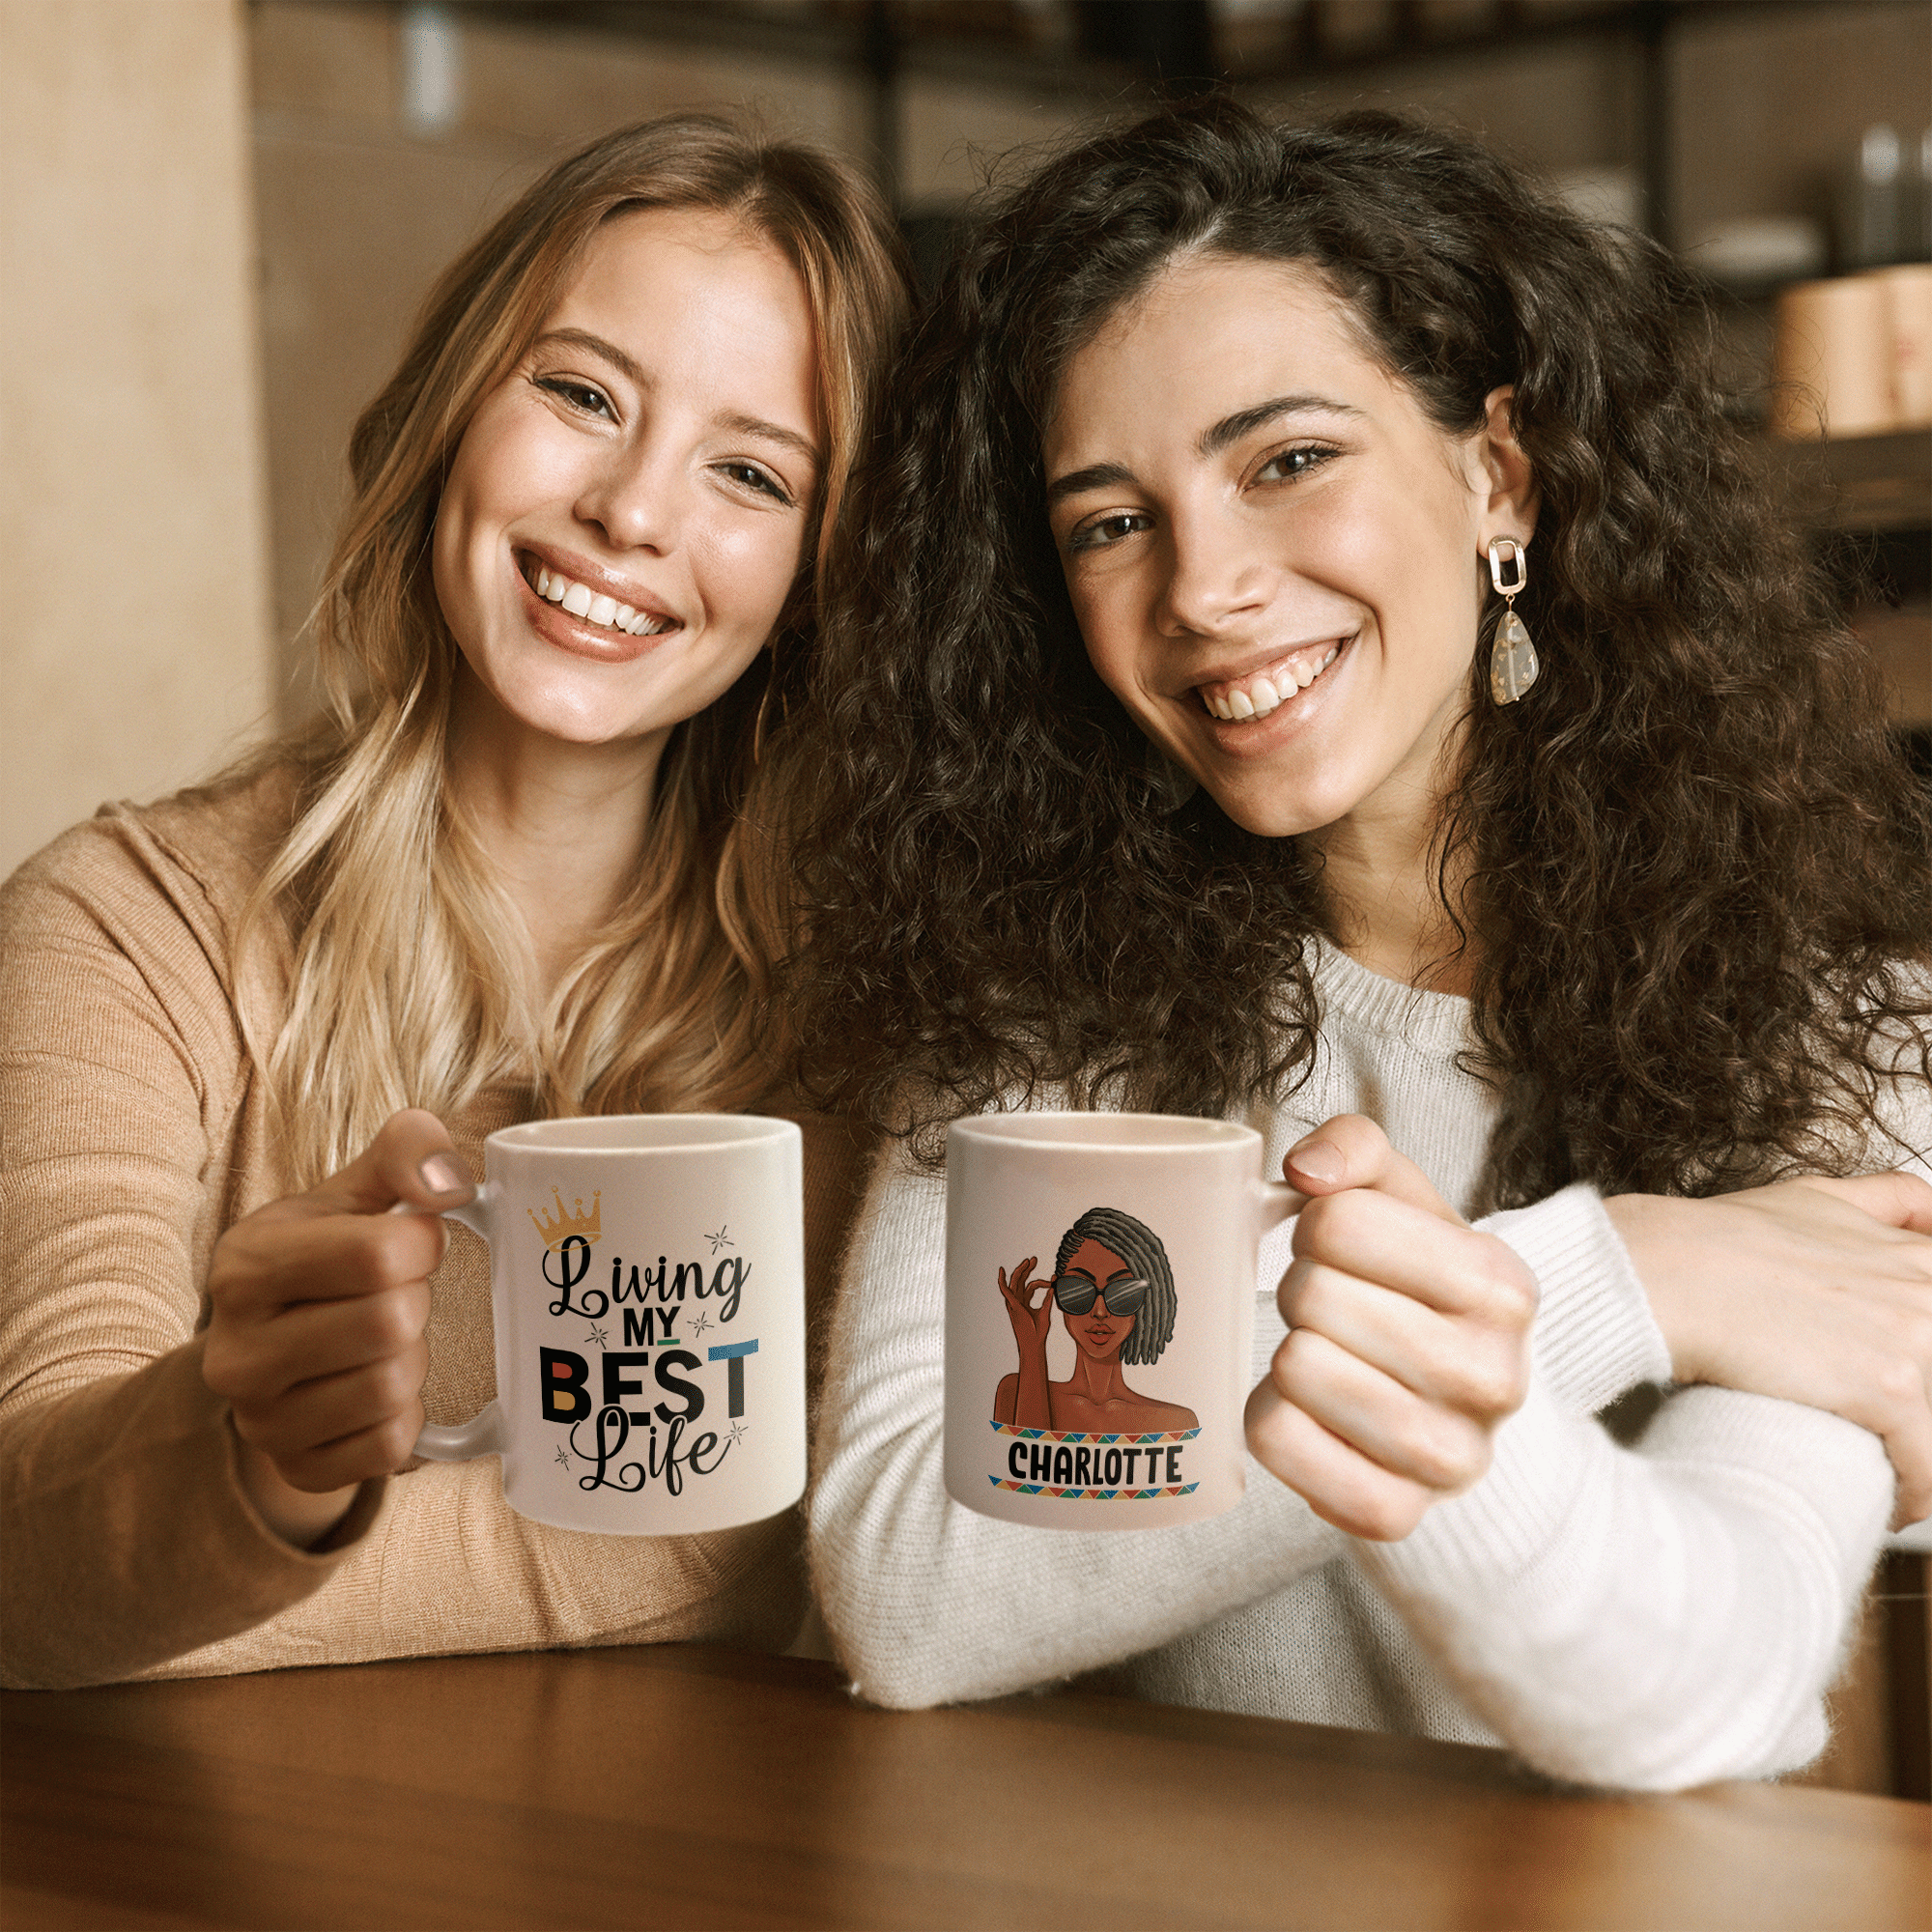 Living My Best Life - Personalized Mug - Birthday Gift For Black Girl & Woman